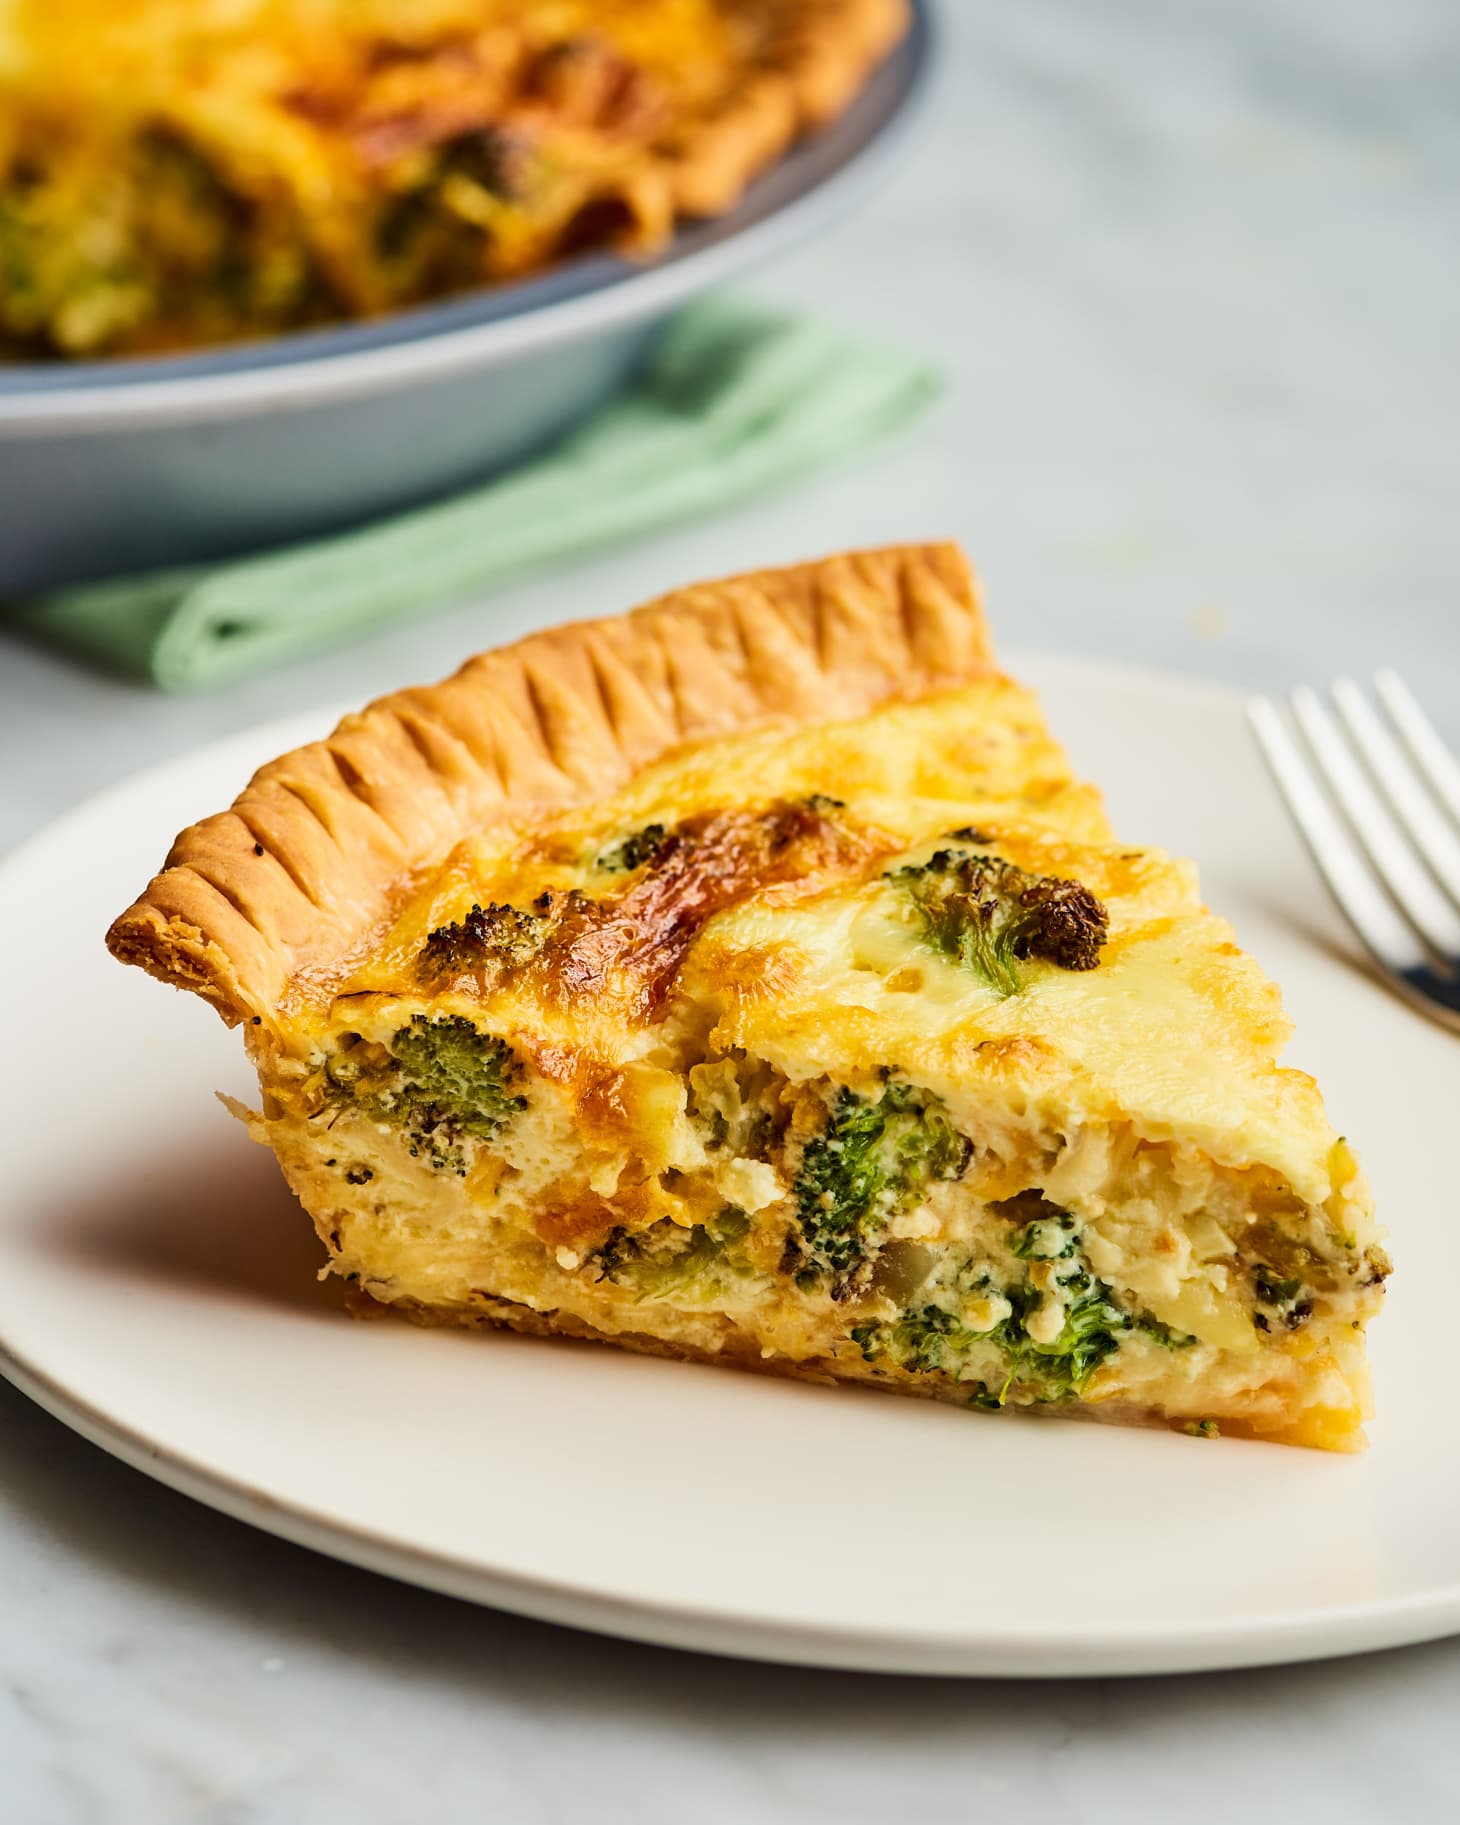 Our 9 Best Quiche Recipes | Kitchn